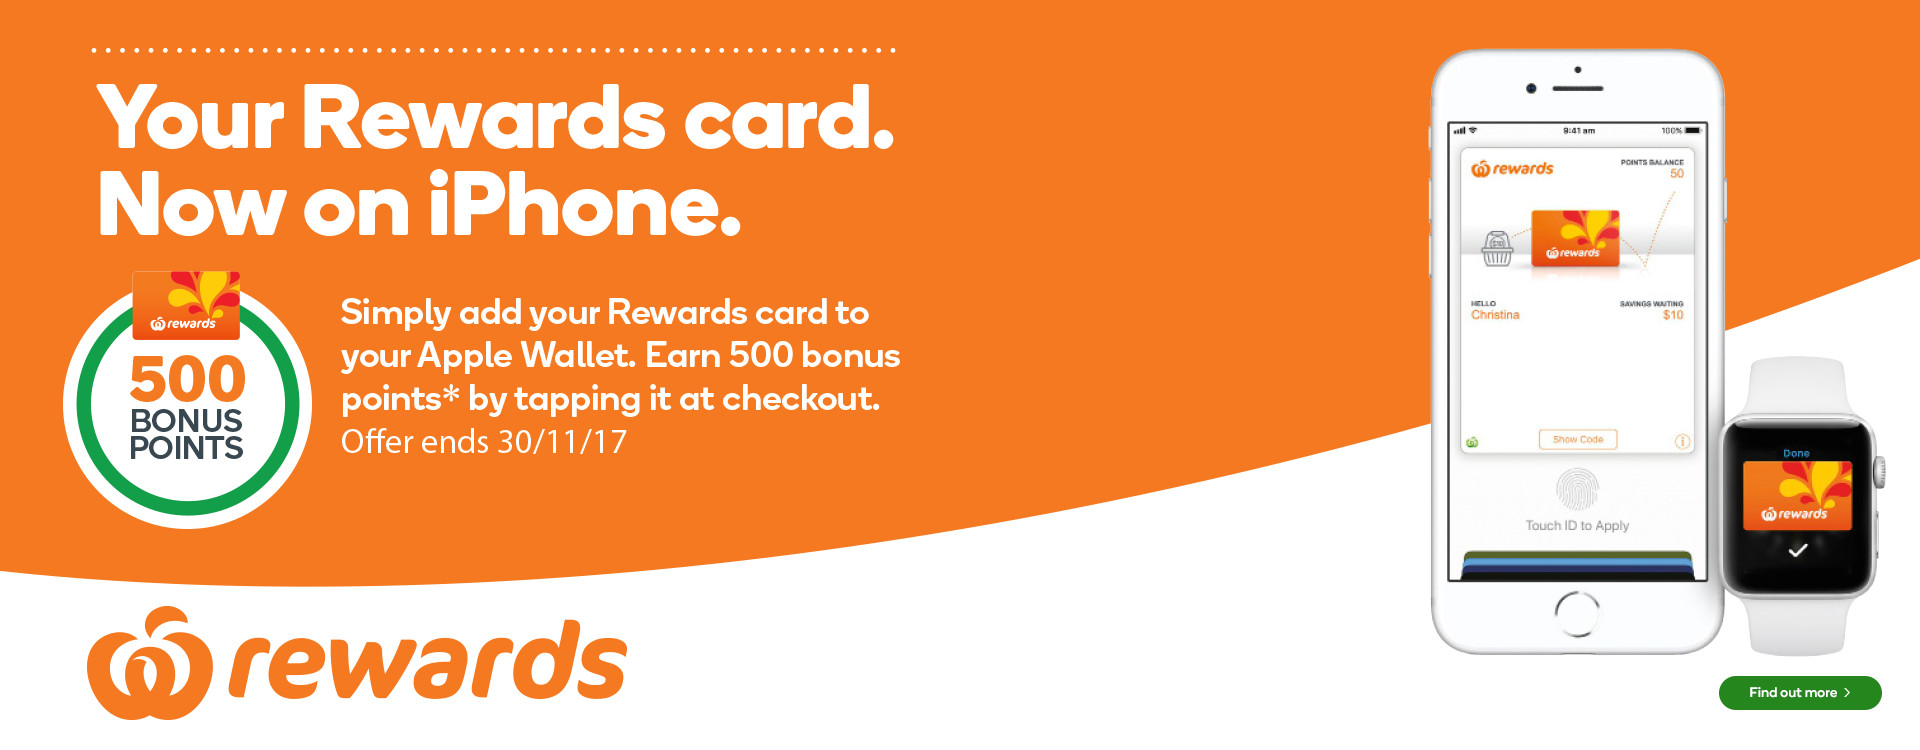 20x Everyday Rewards Points On Apple Gift Cards Woolworths, 41% OFF